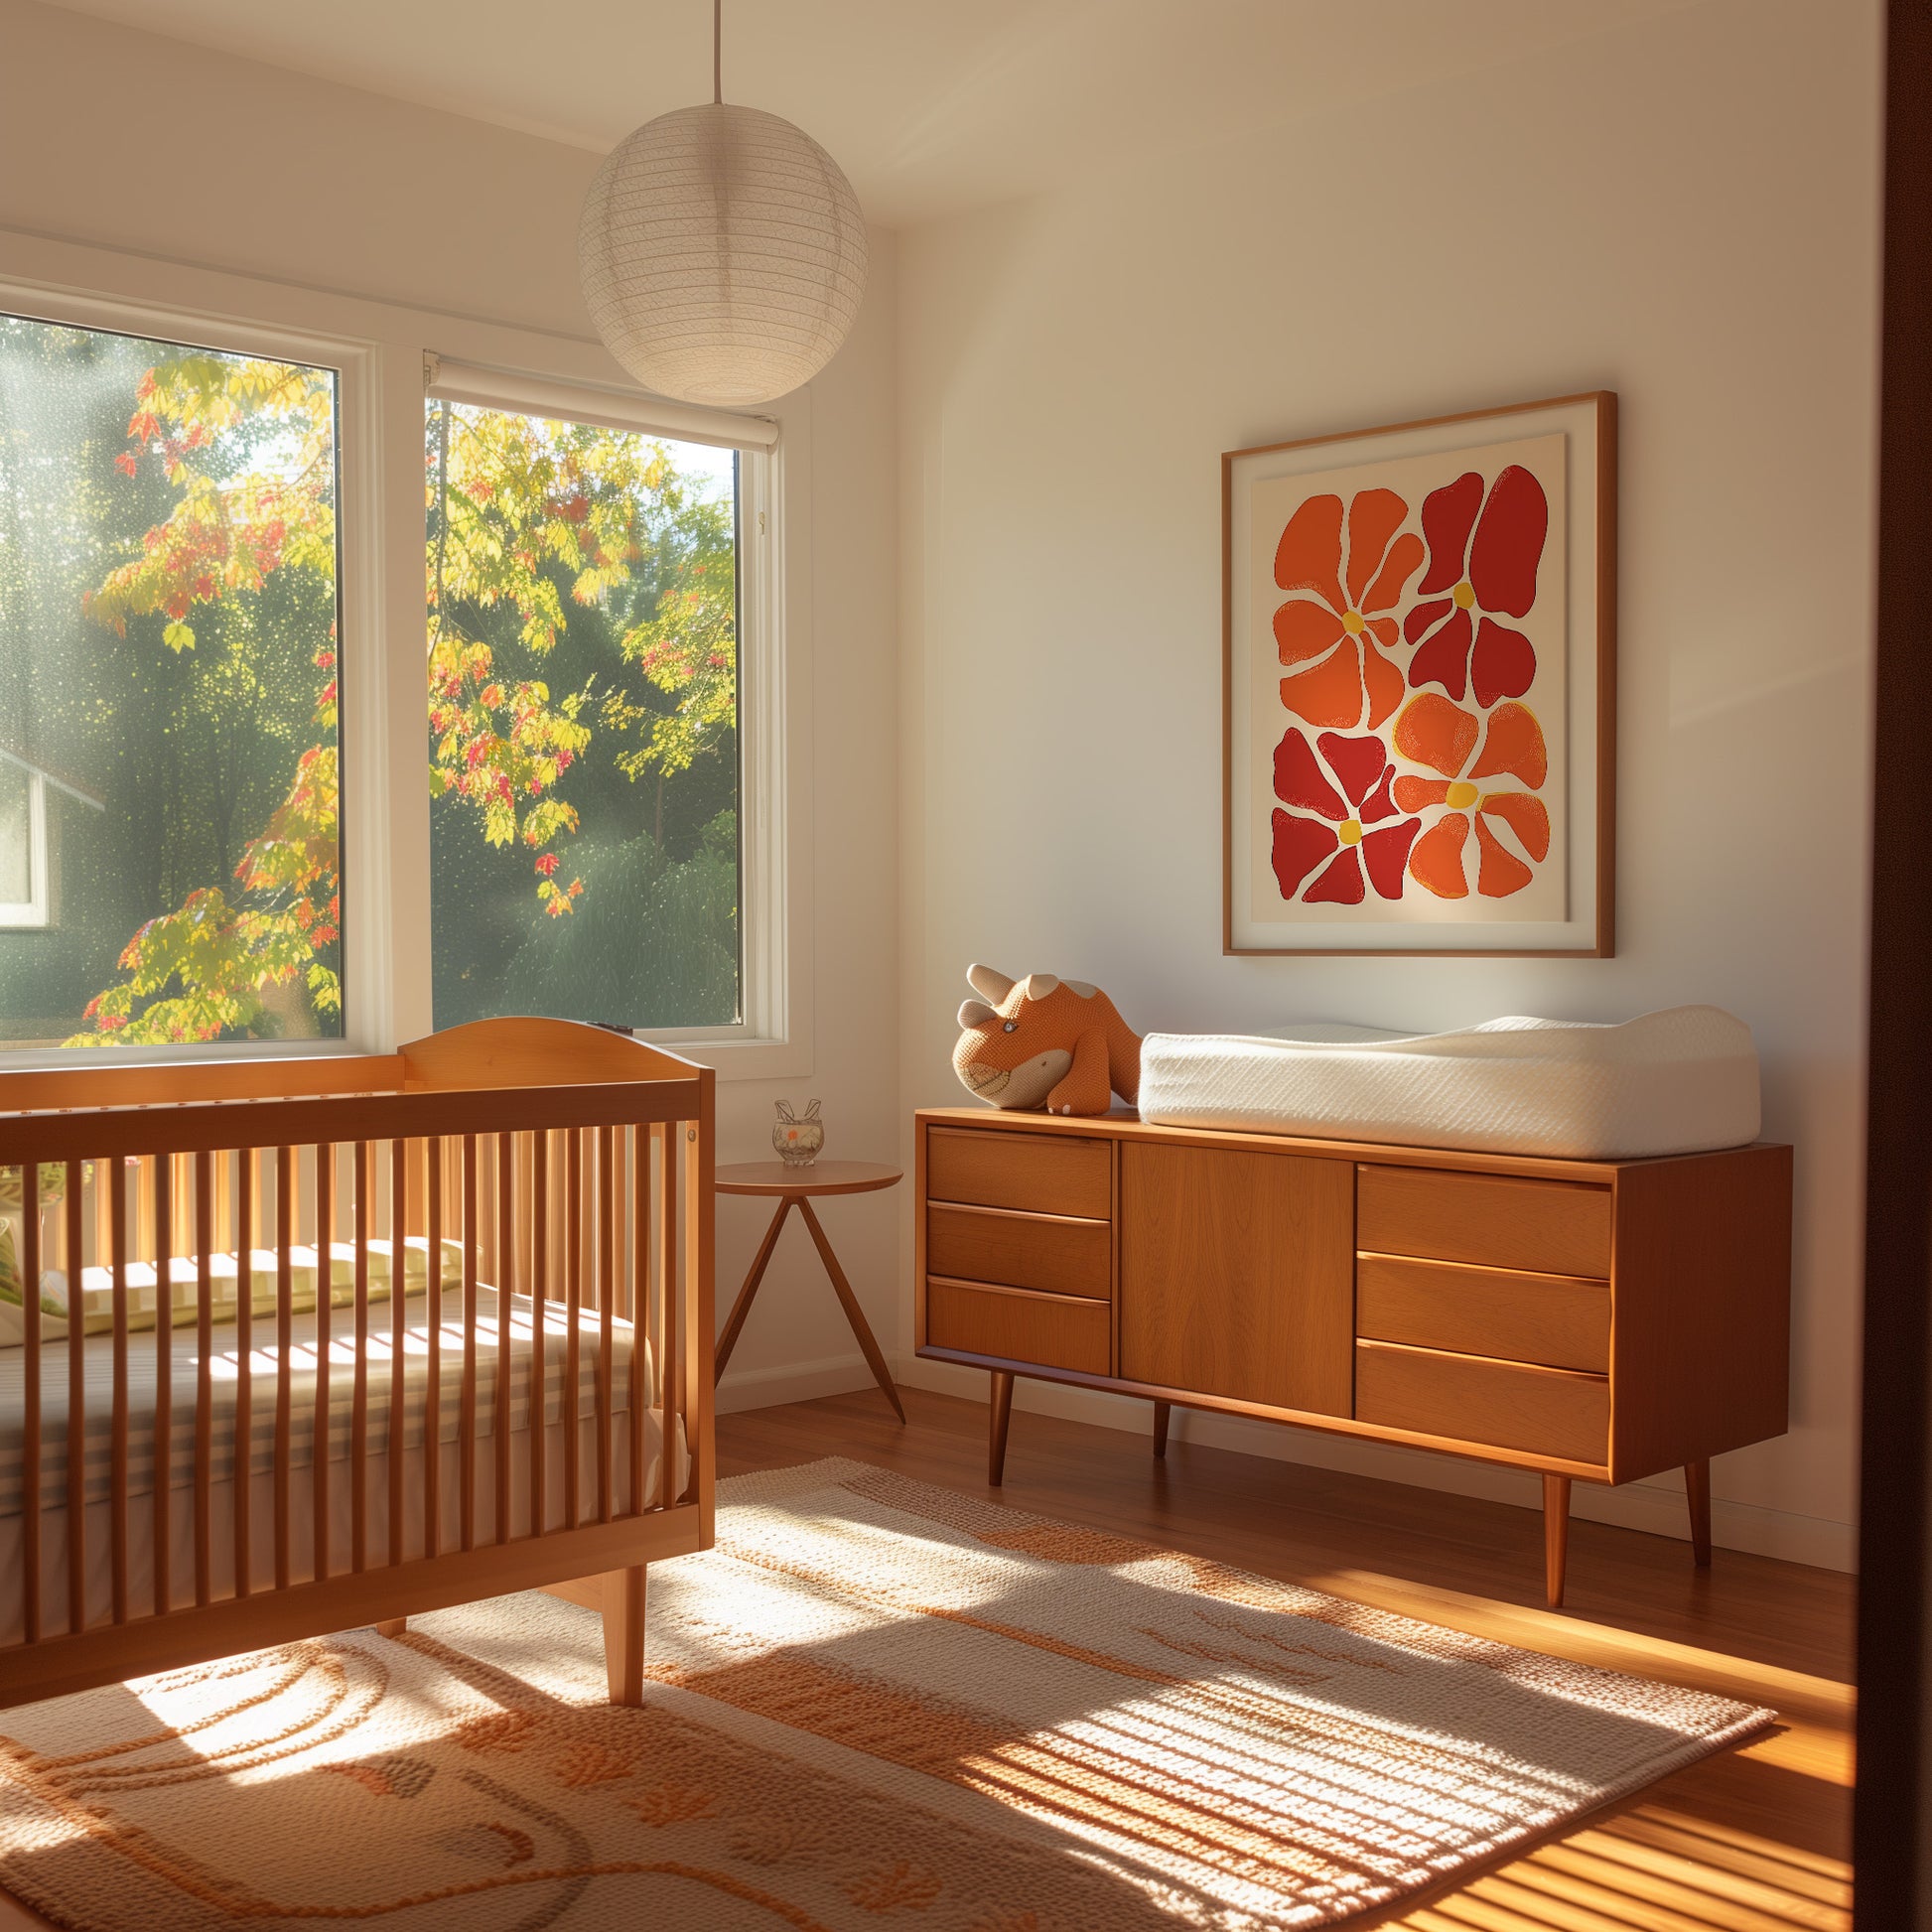 A cozy nursery with a crib, dresser, and autumn leaves visible through the window.